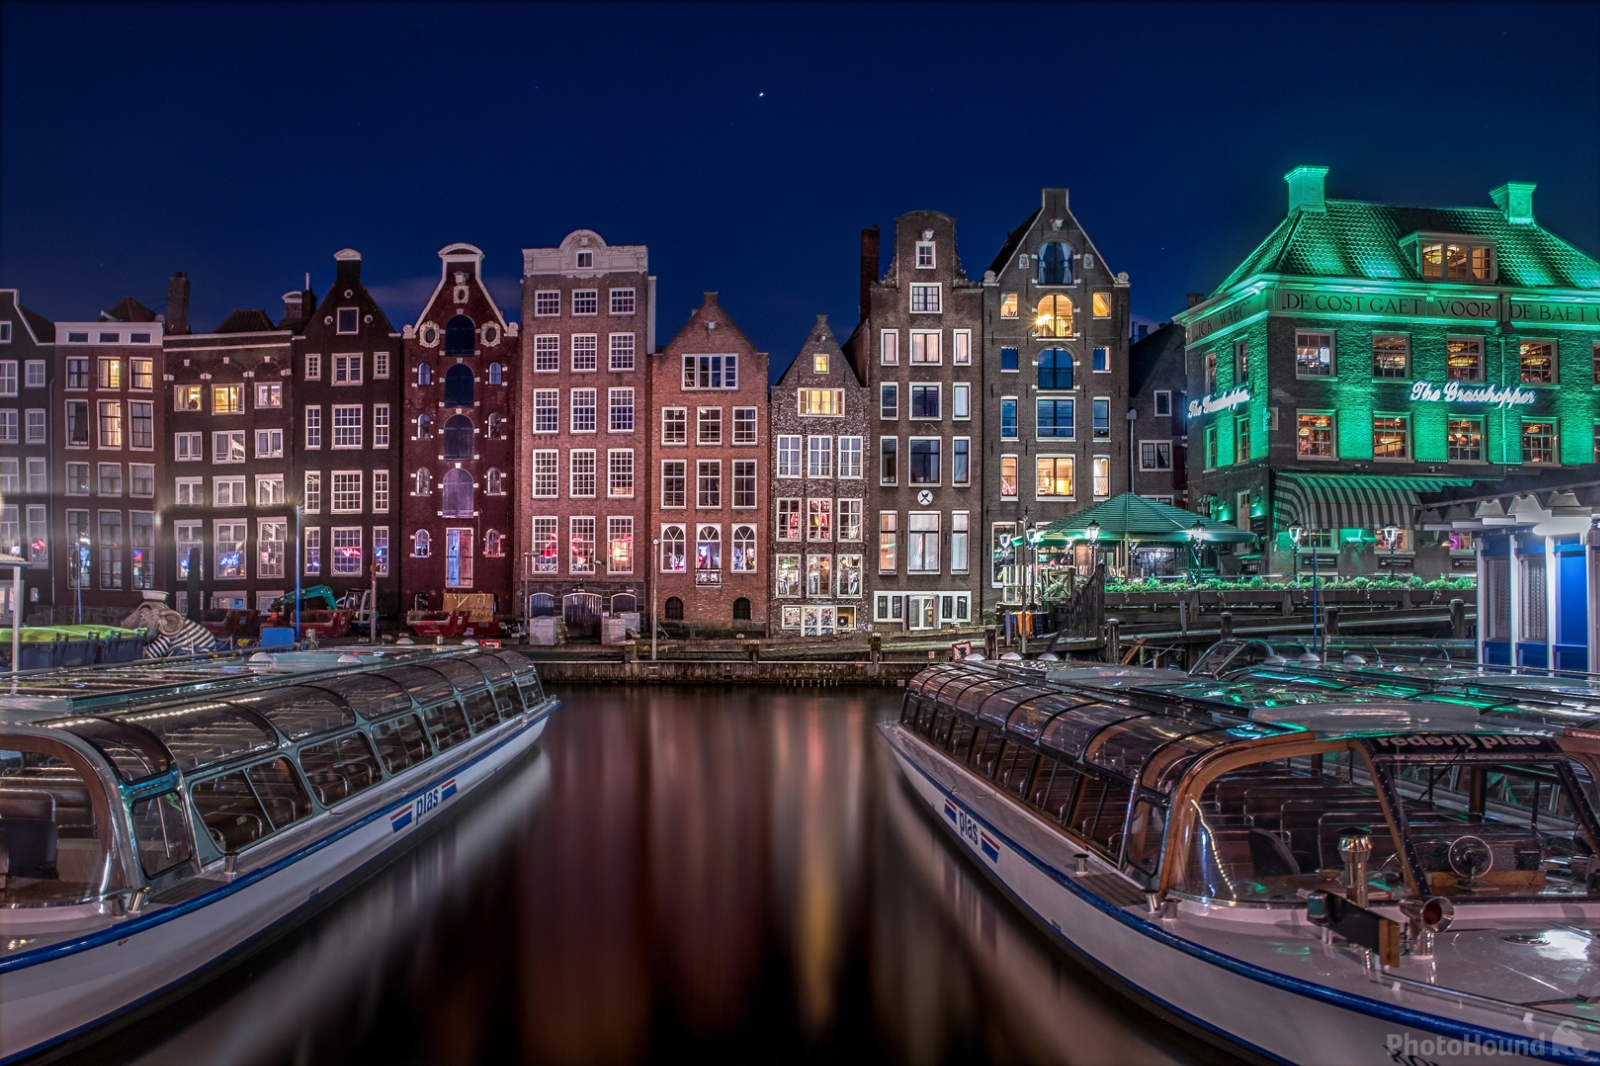 Image of Houses in the Damrak, Amsterdam by Rana Jabeen